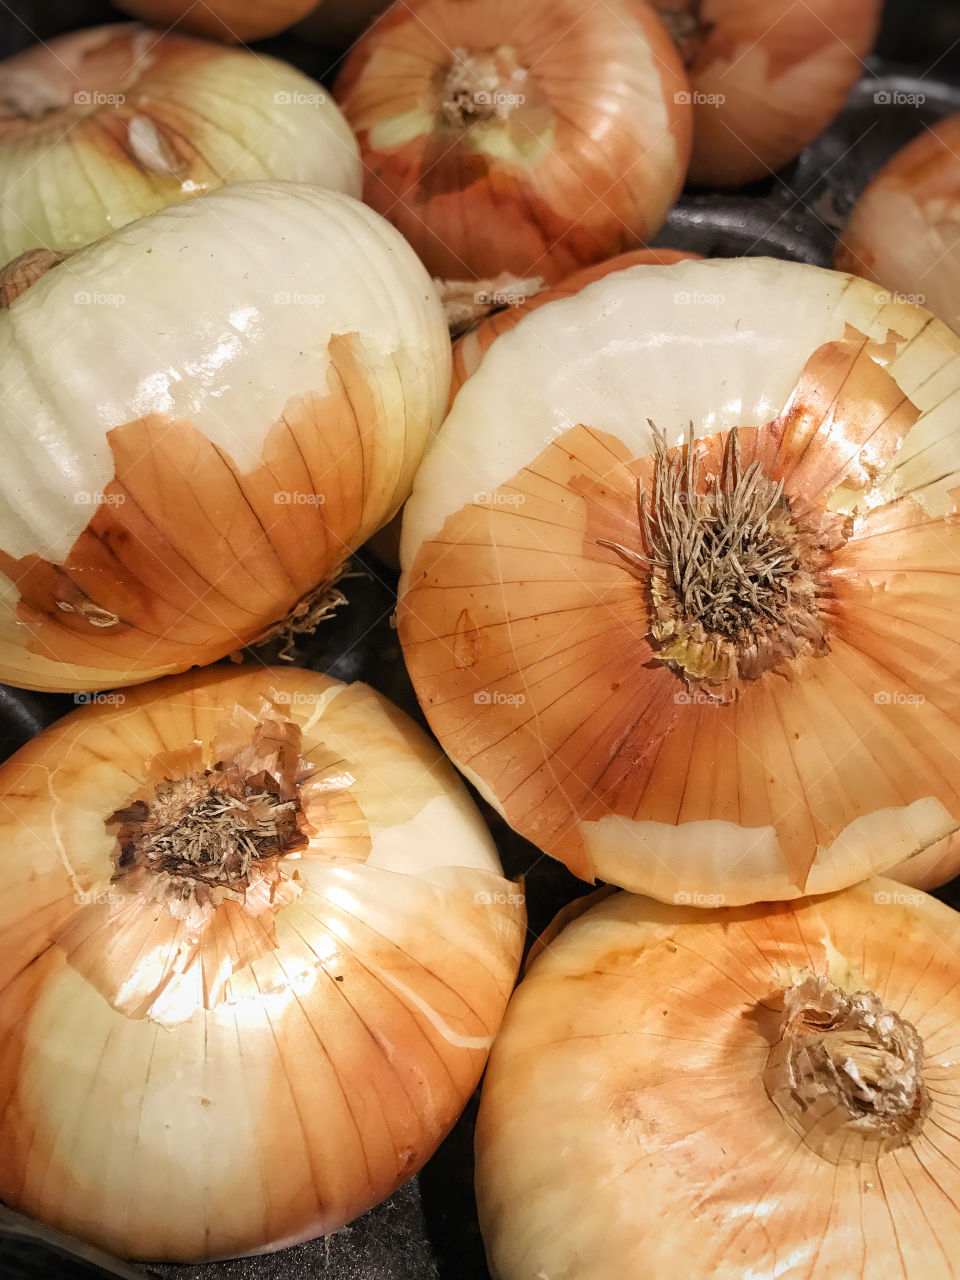 Imperfect onions